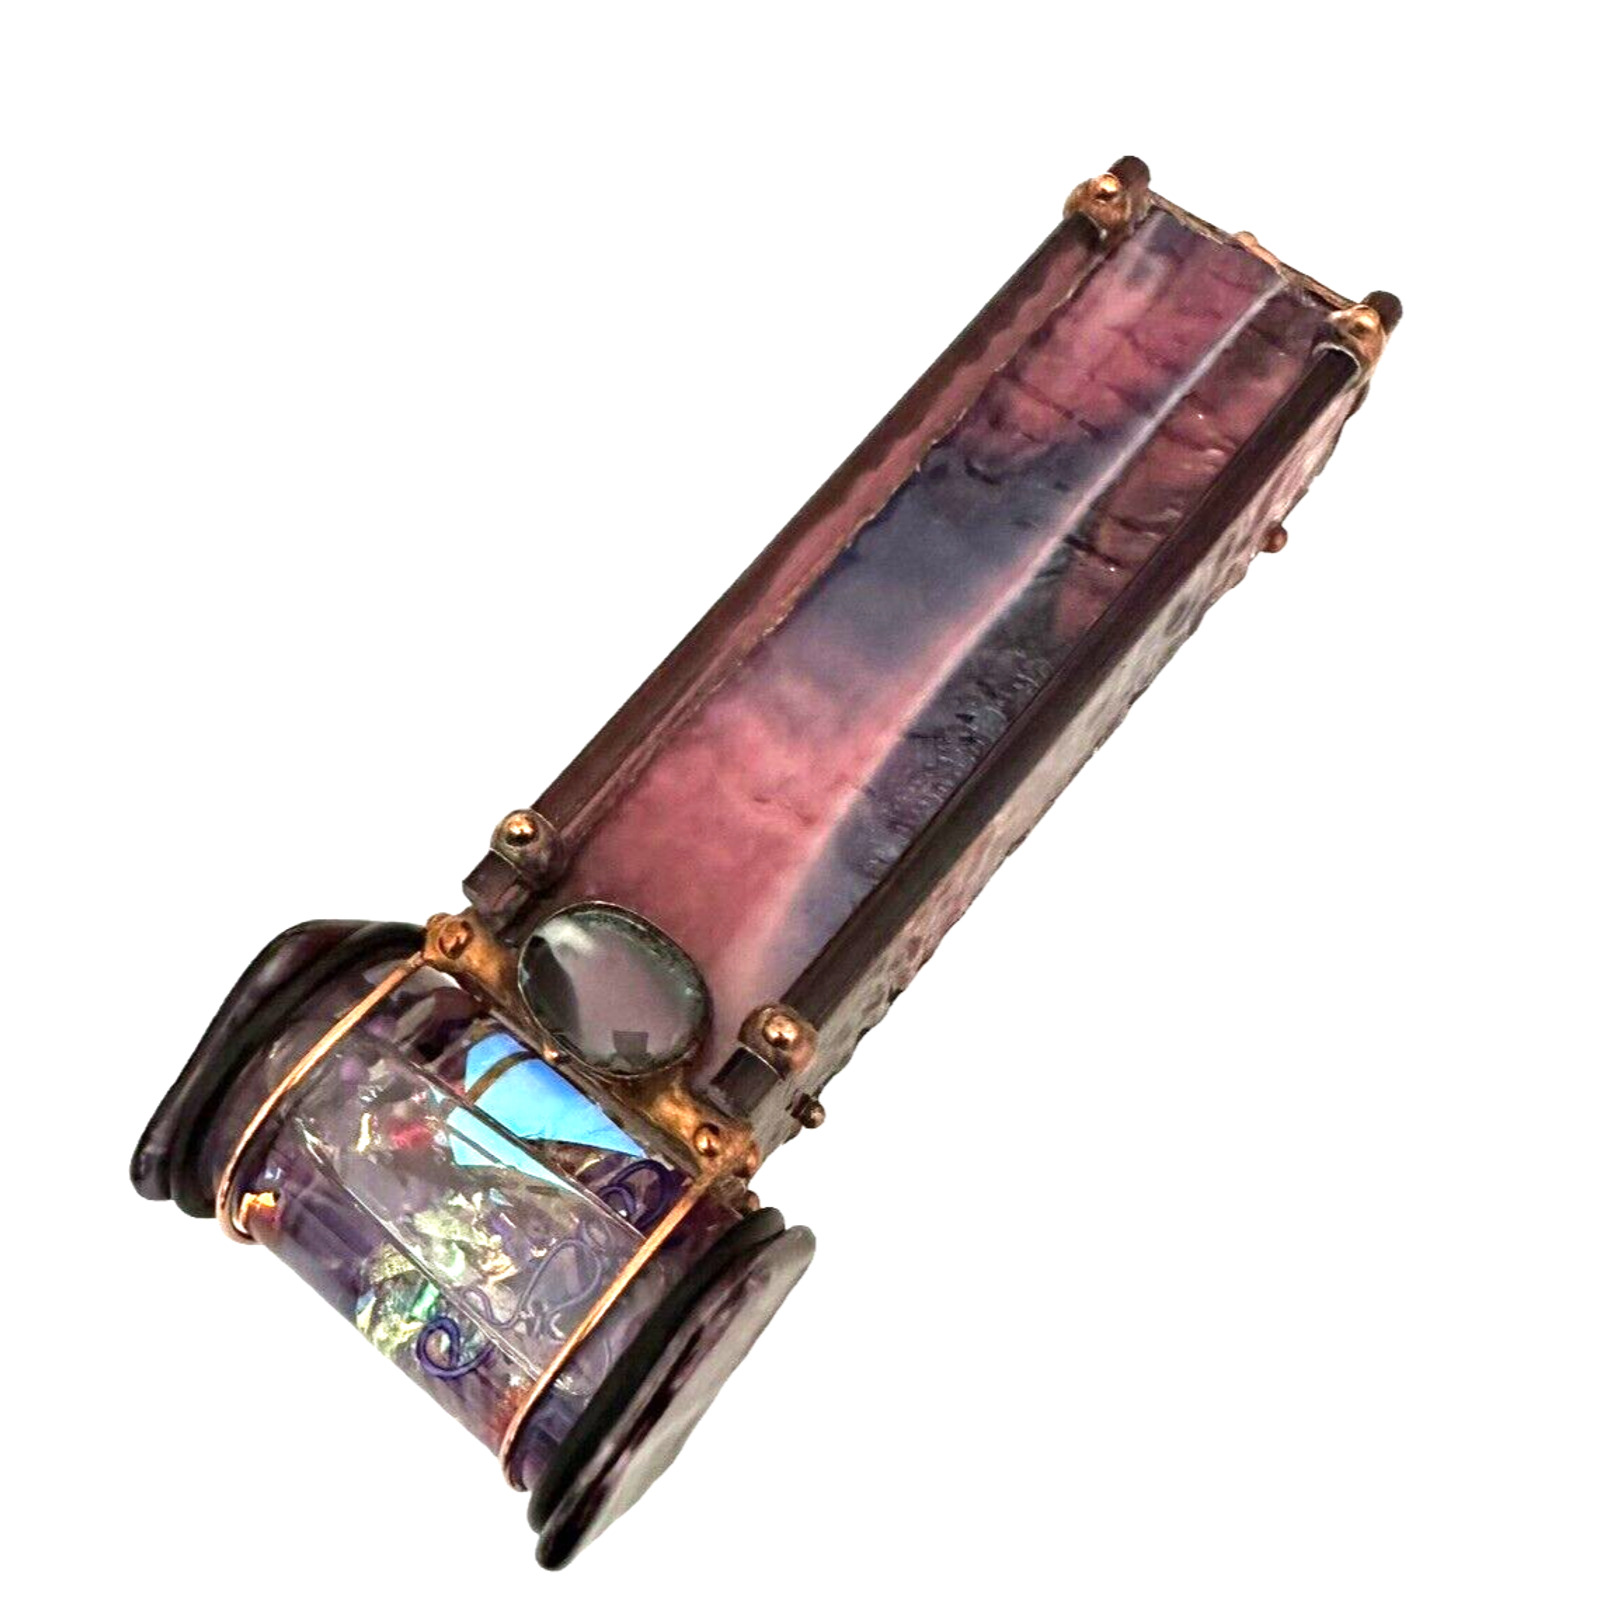 NEW Sue Rioux Gemstone Kaleidoscope Amethyst Stained Glass & Copper Signed